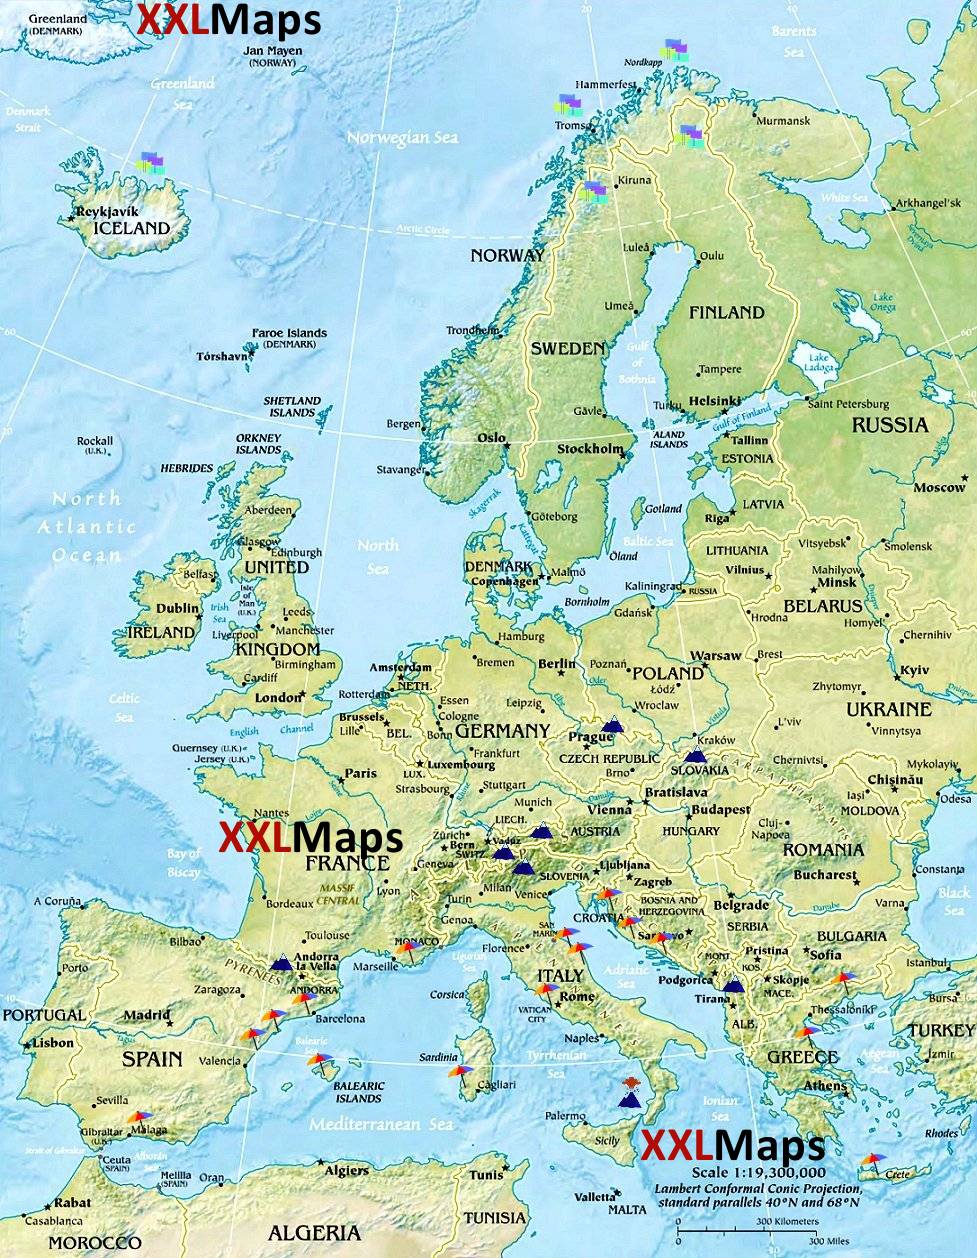 Physical map of Europe